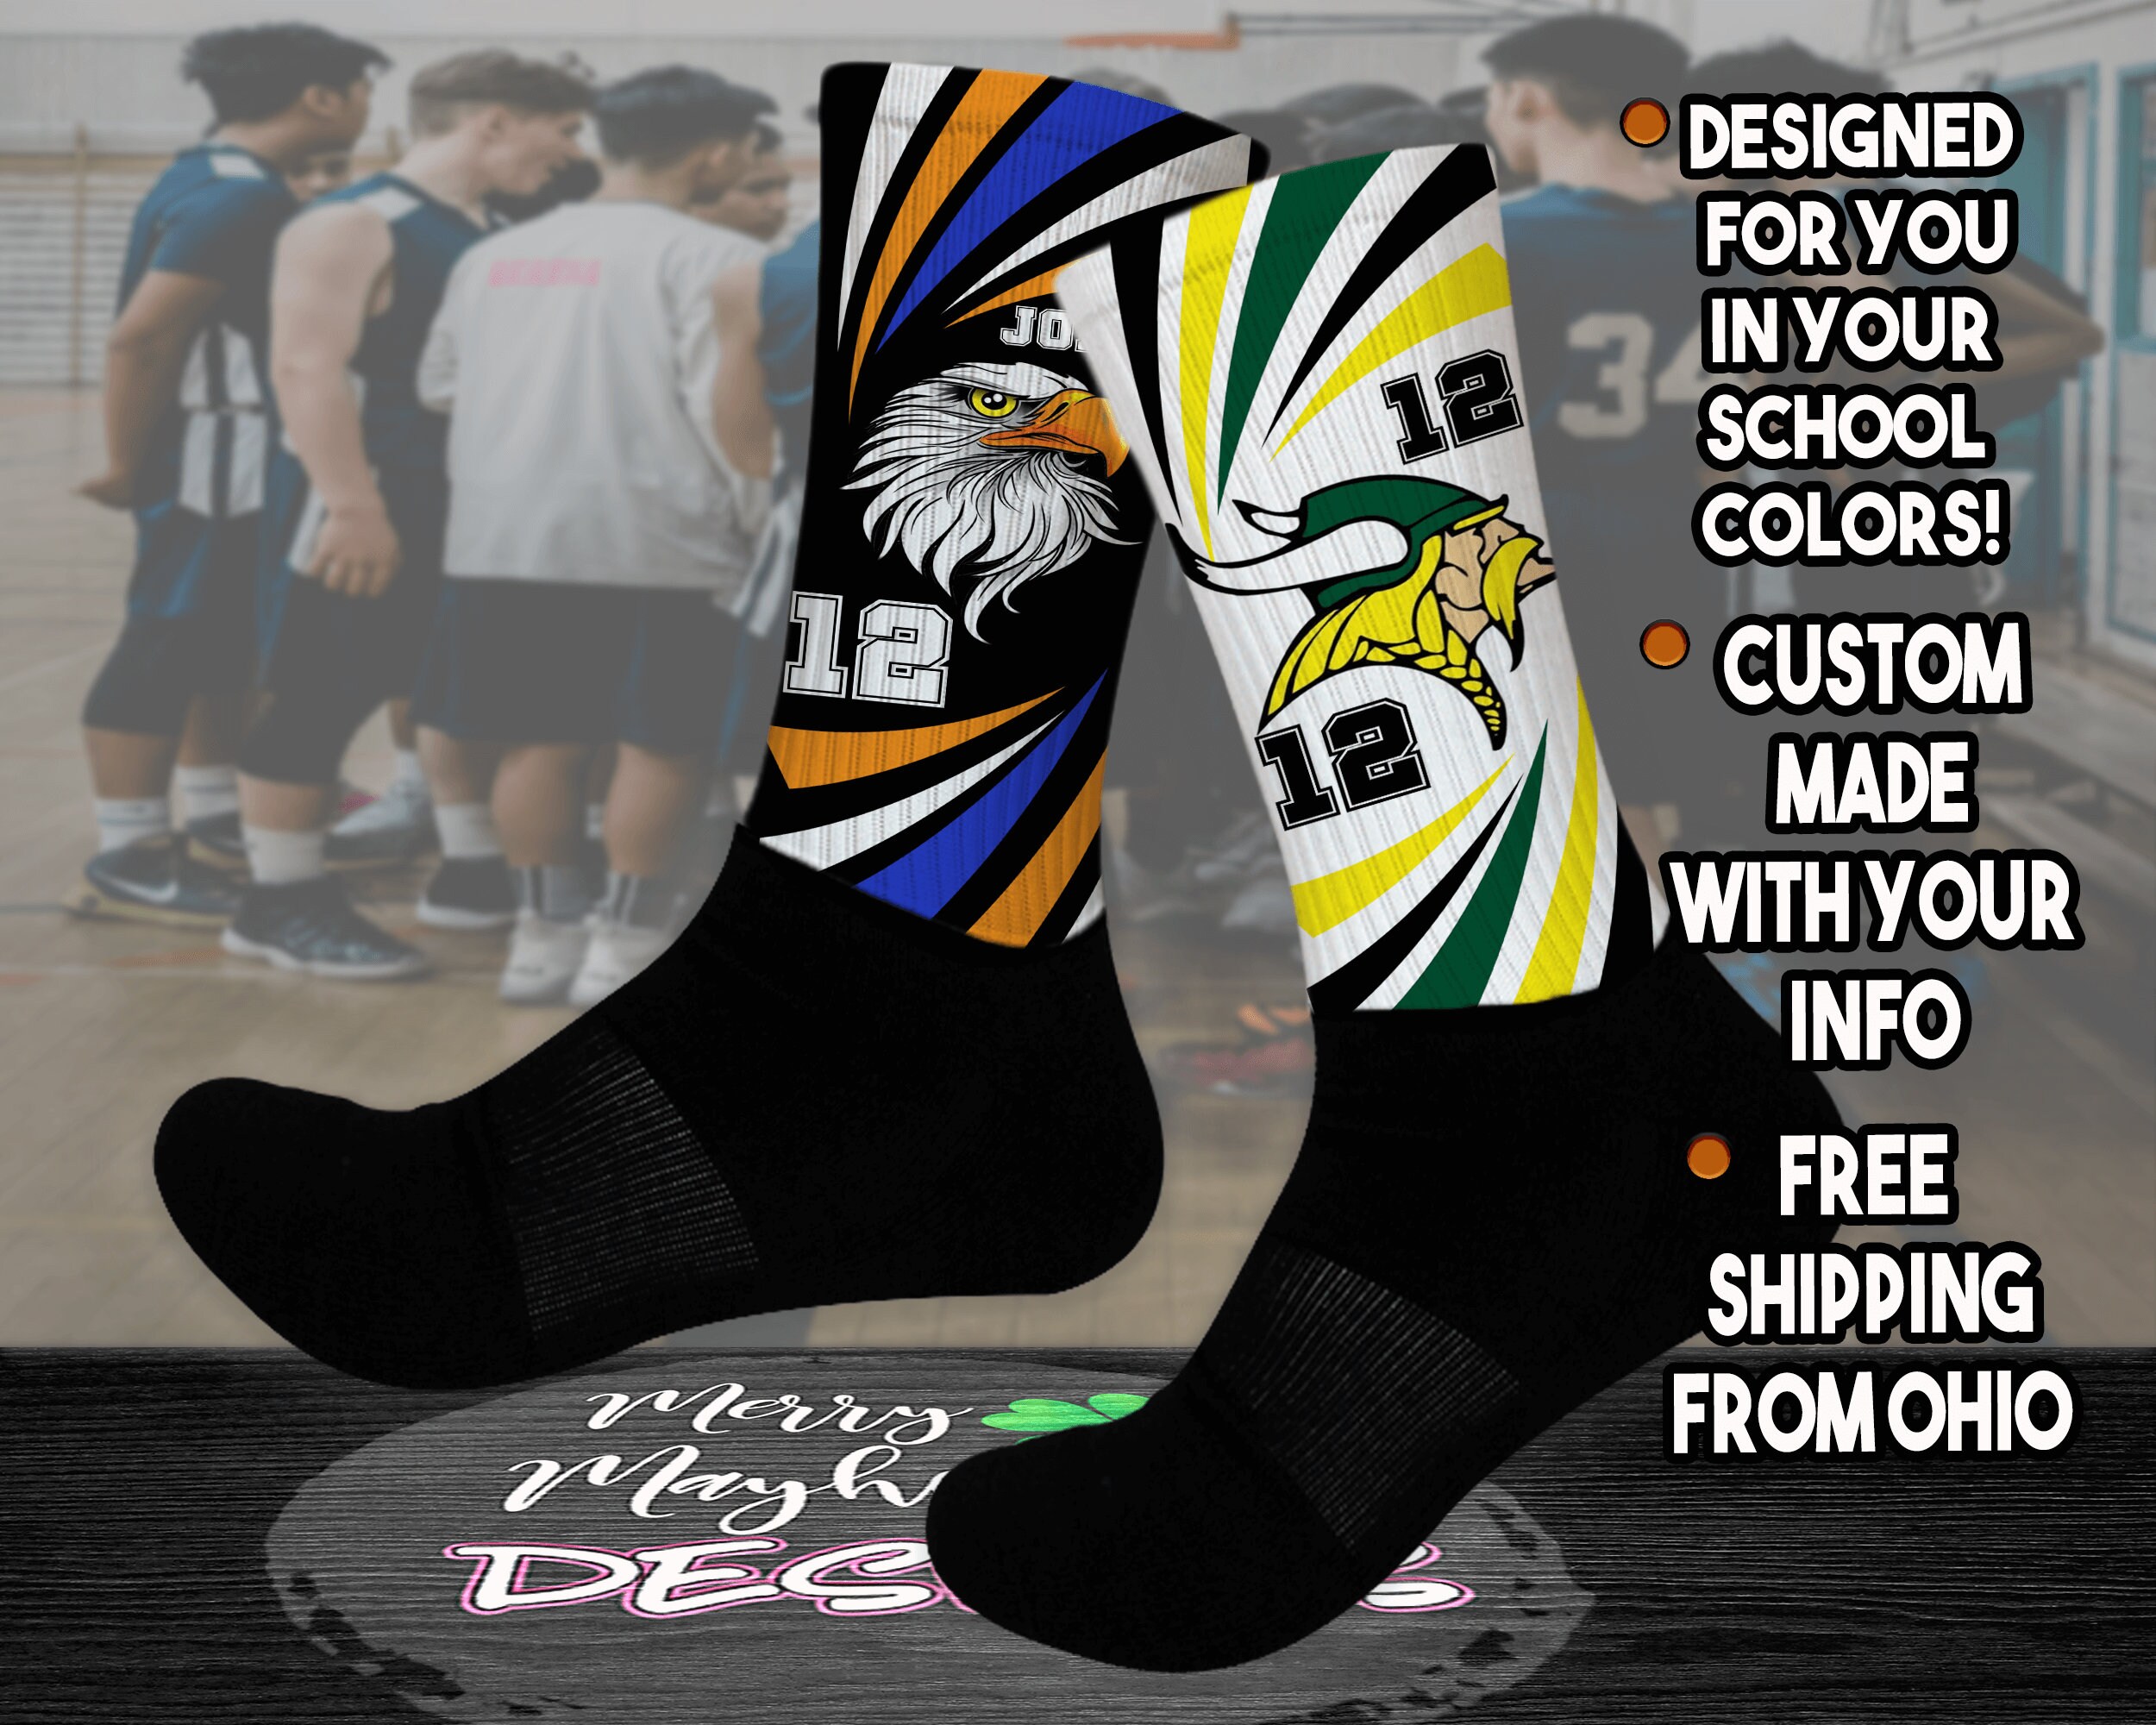 Custom Baseball Socks to Match Your Uniform. Create Your Own Personalized Socks with Your Team's Logo, Text, Design, and Colors.